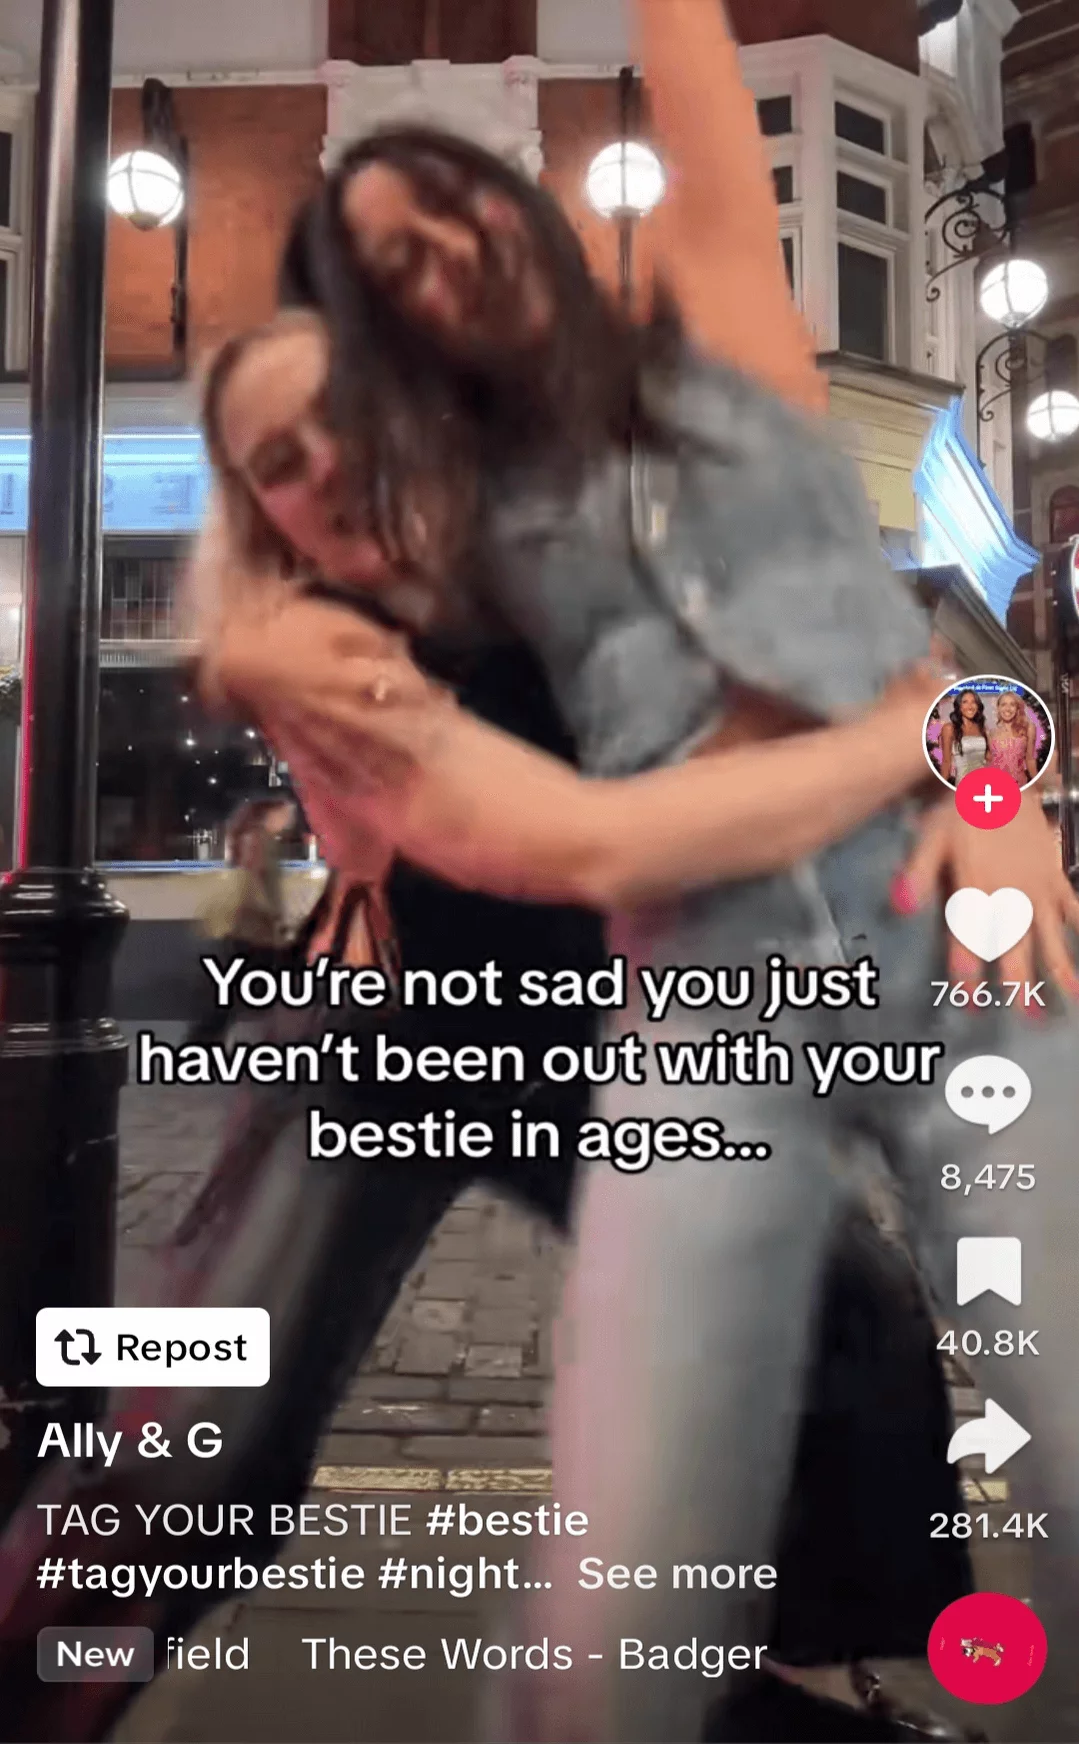 Two friends joyfully hugging and spinning on a city street at night, captured in a lively, blurred motion social media post.